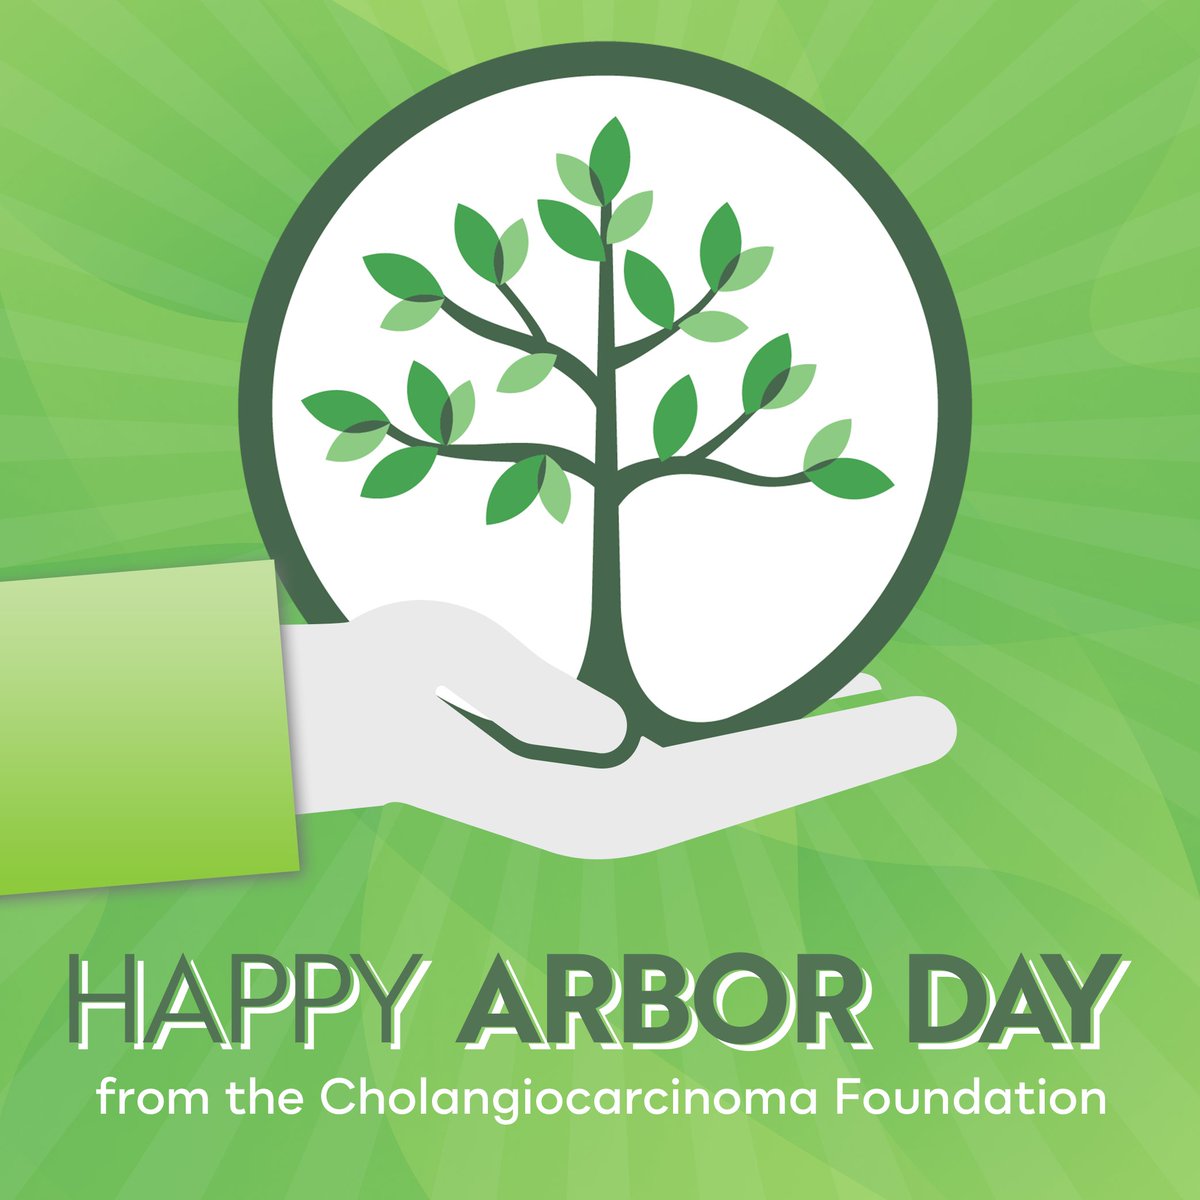 Happy Arbor Day from the Cholangiocarcinoma Foundation! 🌳